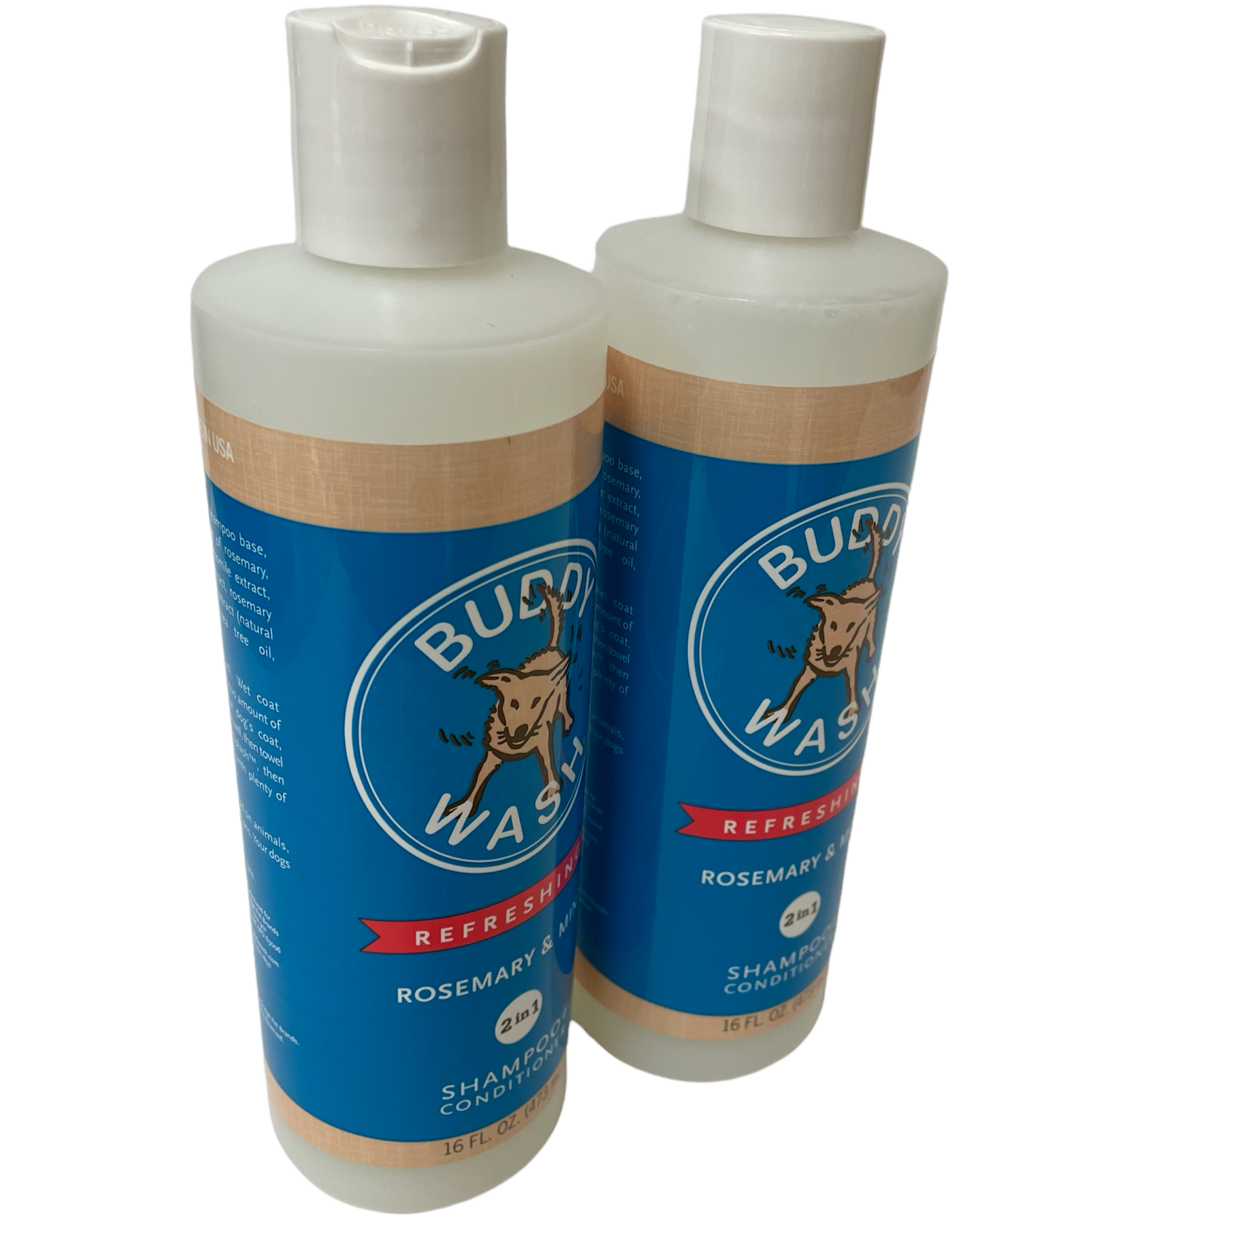 Buddy Wash Dog Shampoo And Conditioner In 1 Rosemary And Mint Lot Of 2 Bottles - $21.62